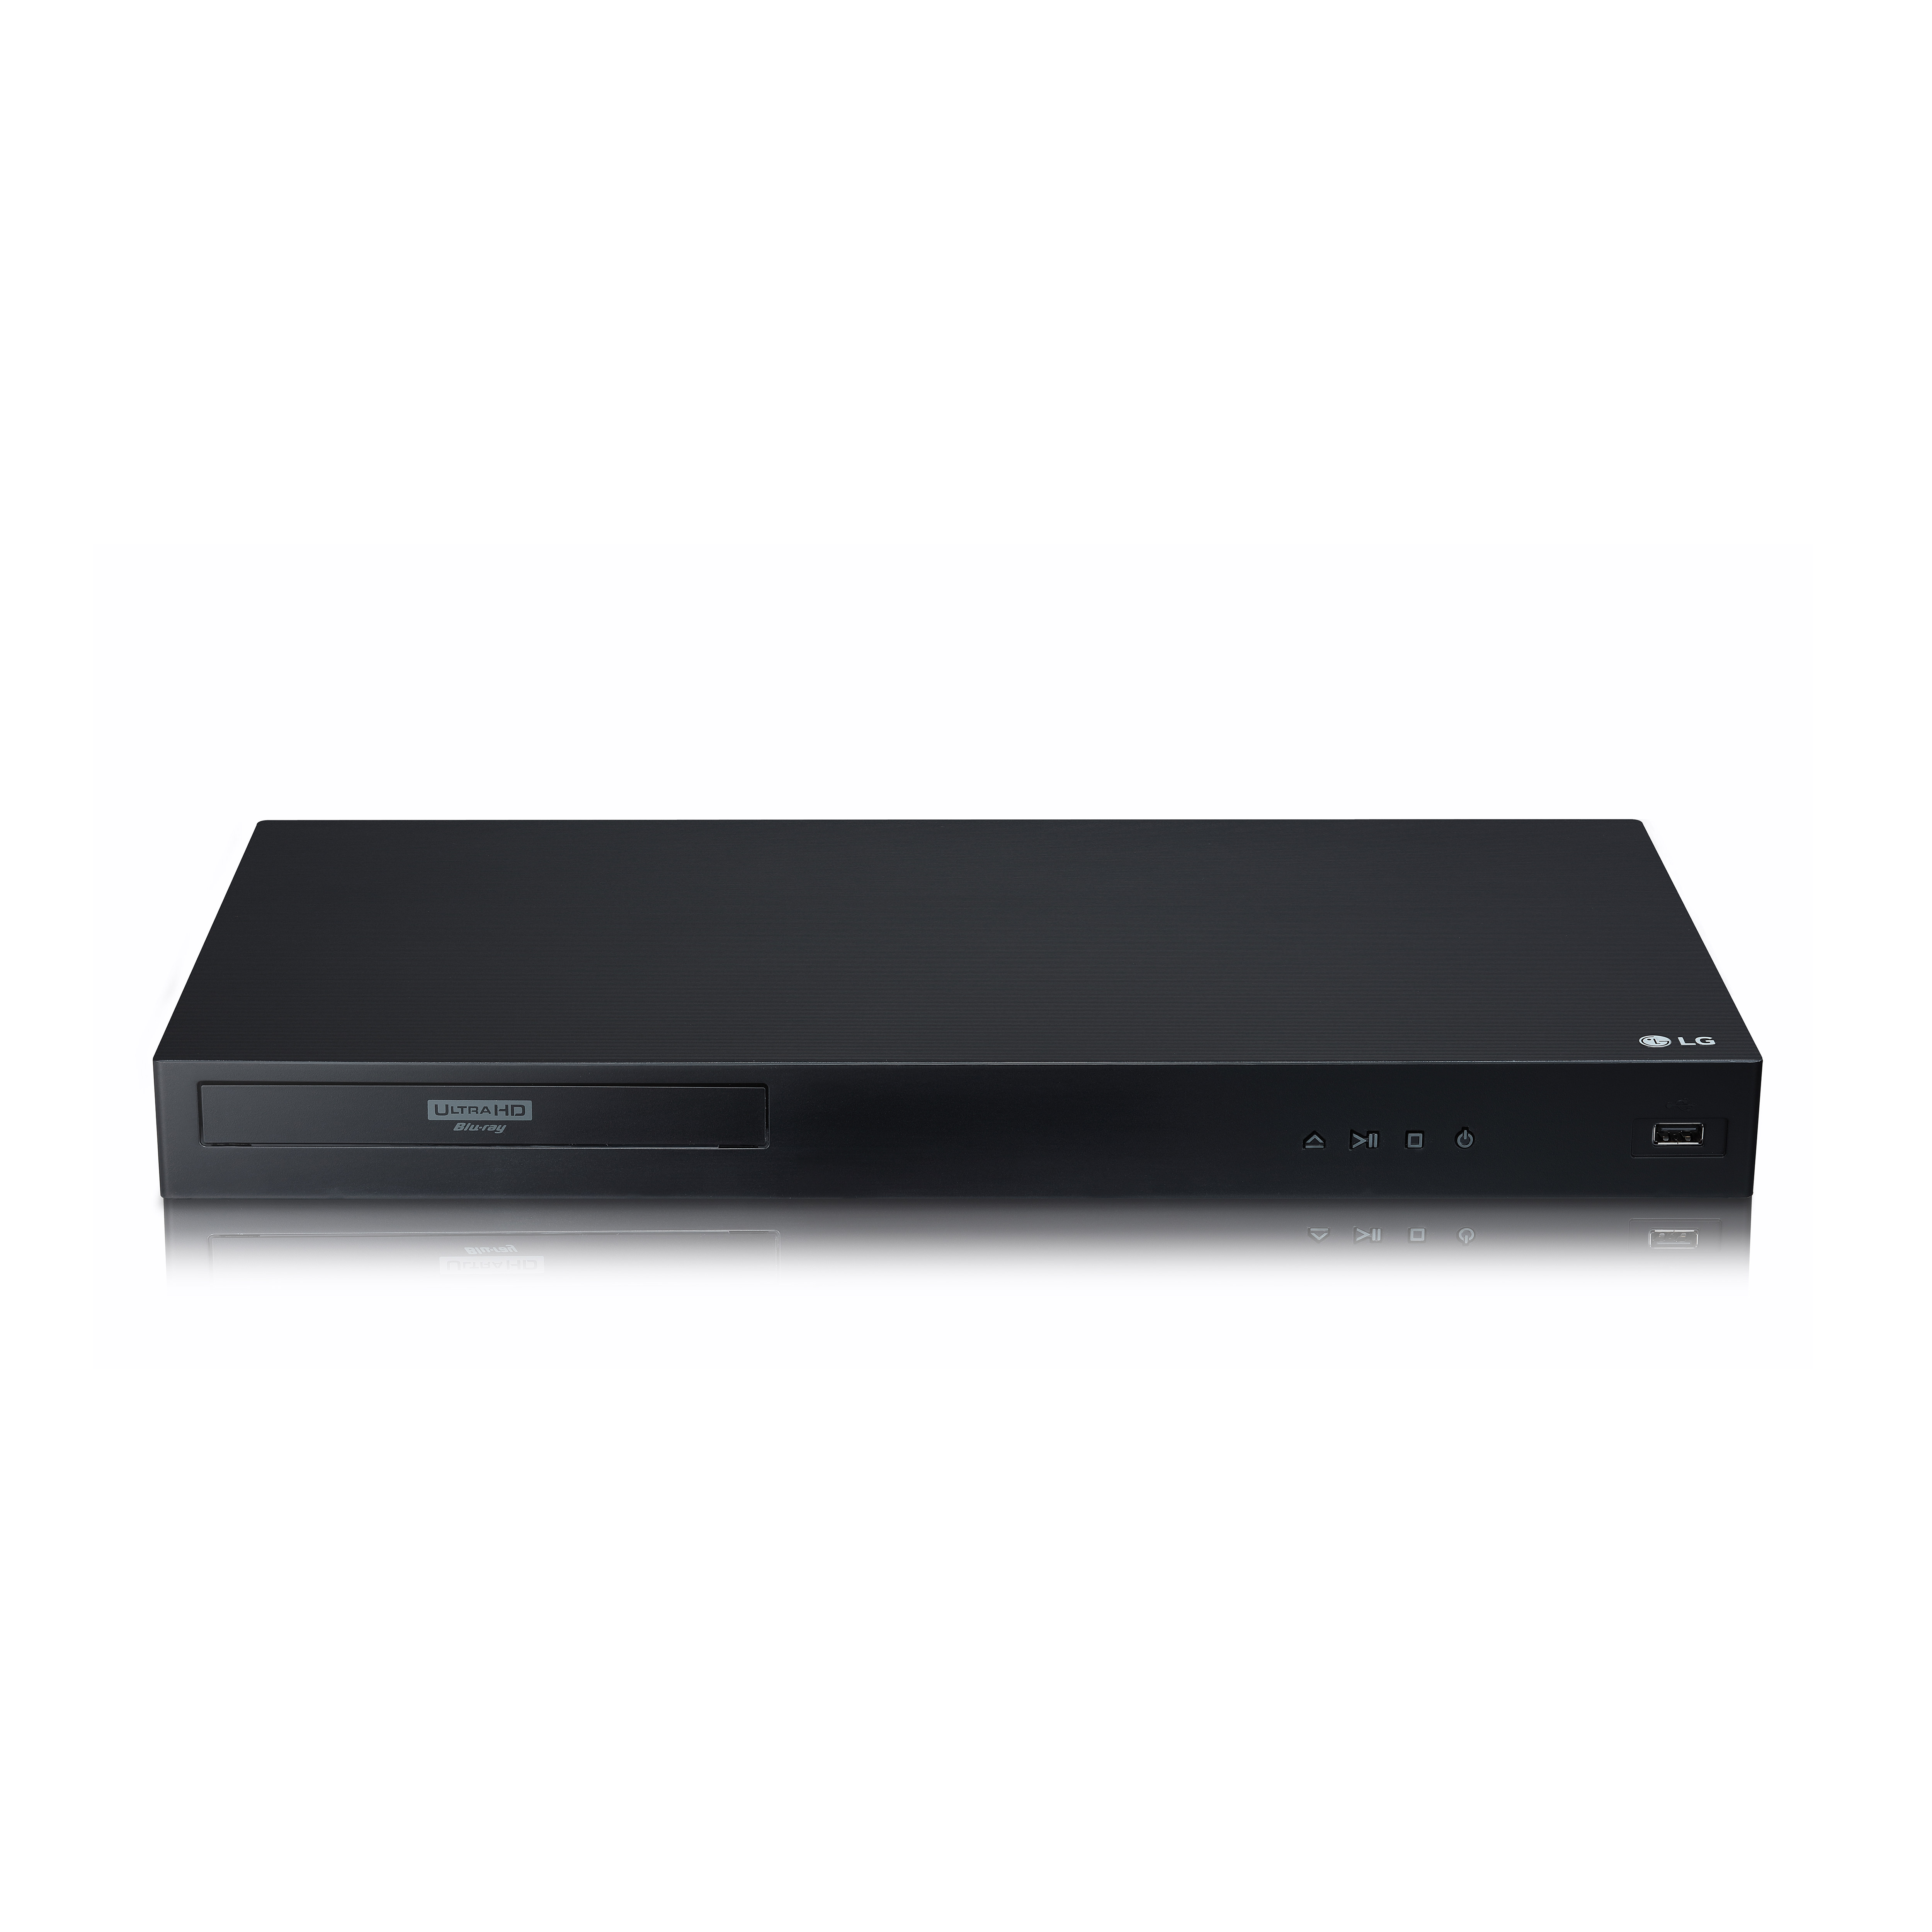 LG UBK90 4K Ultra HD HDR Dolby Vision Blu-ray Player - image 1 of 10